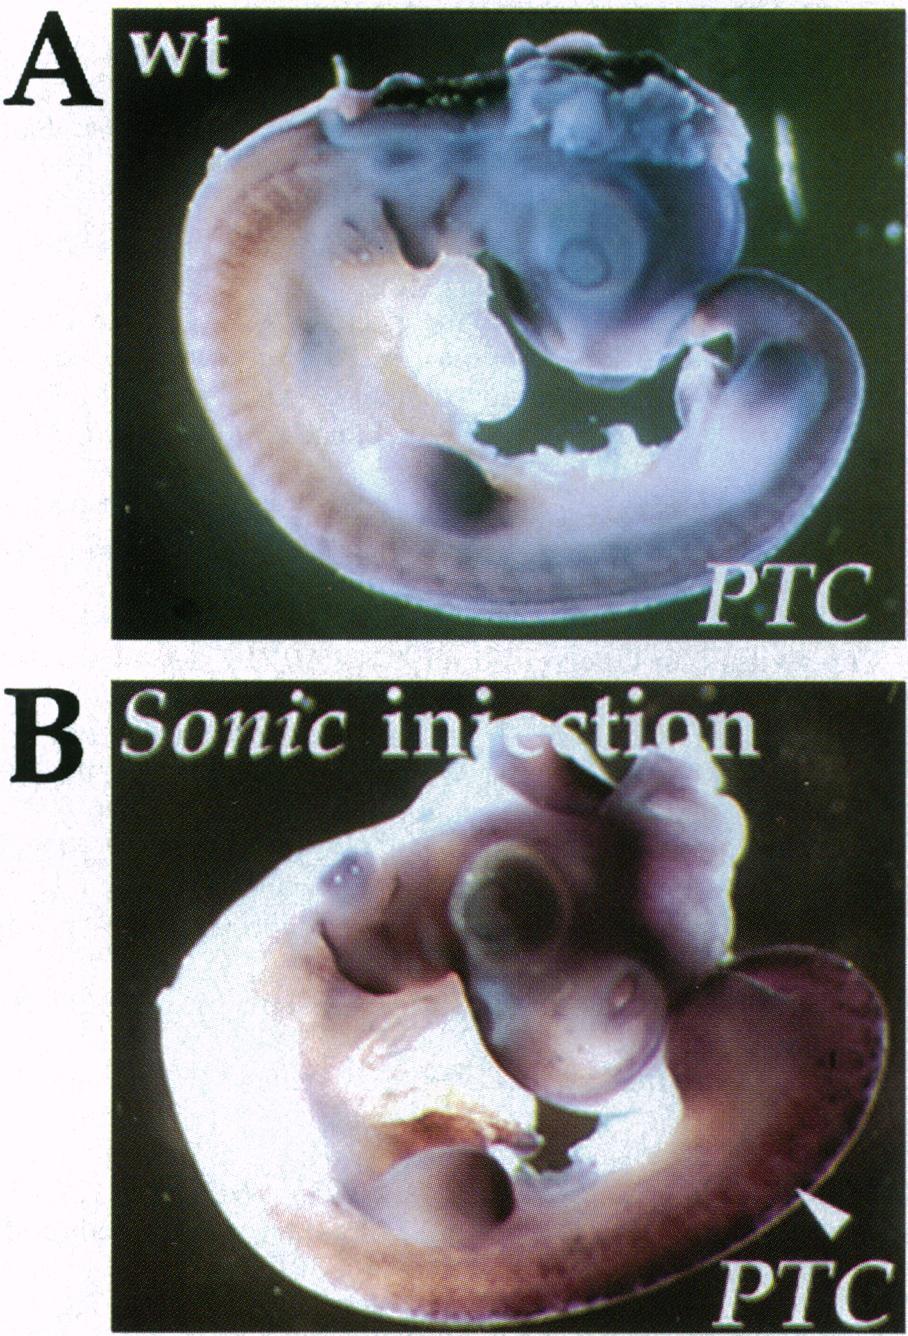 PTC is found in the notochord, ventral part of the somites, and splanchnic mesoderm. The neural tube shows lower levels of PTC expression in the floor plate cells.